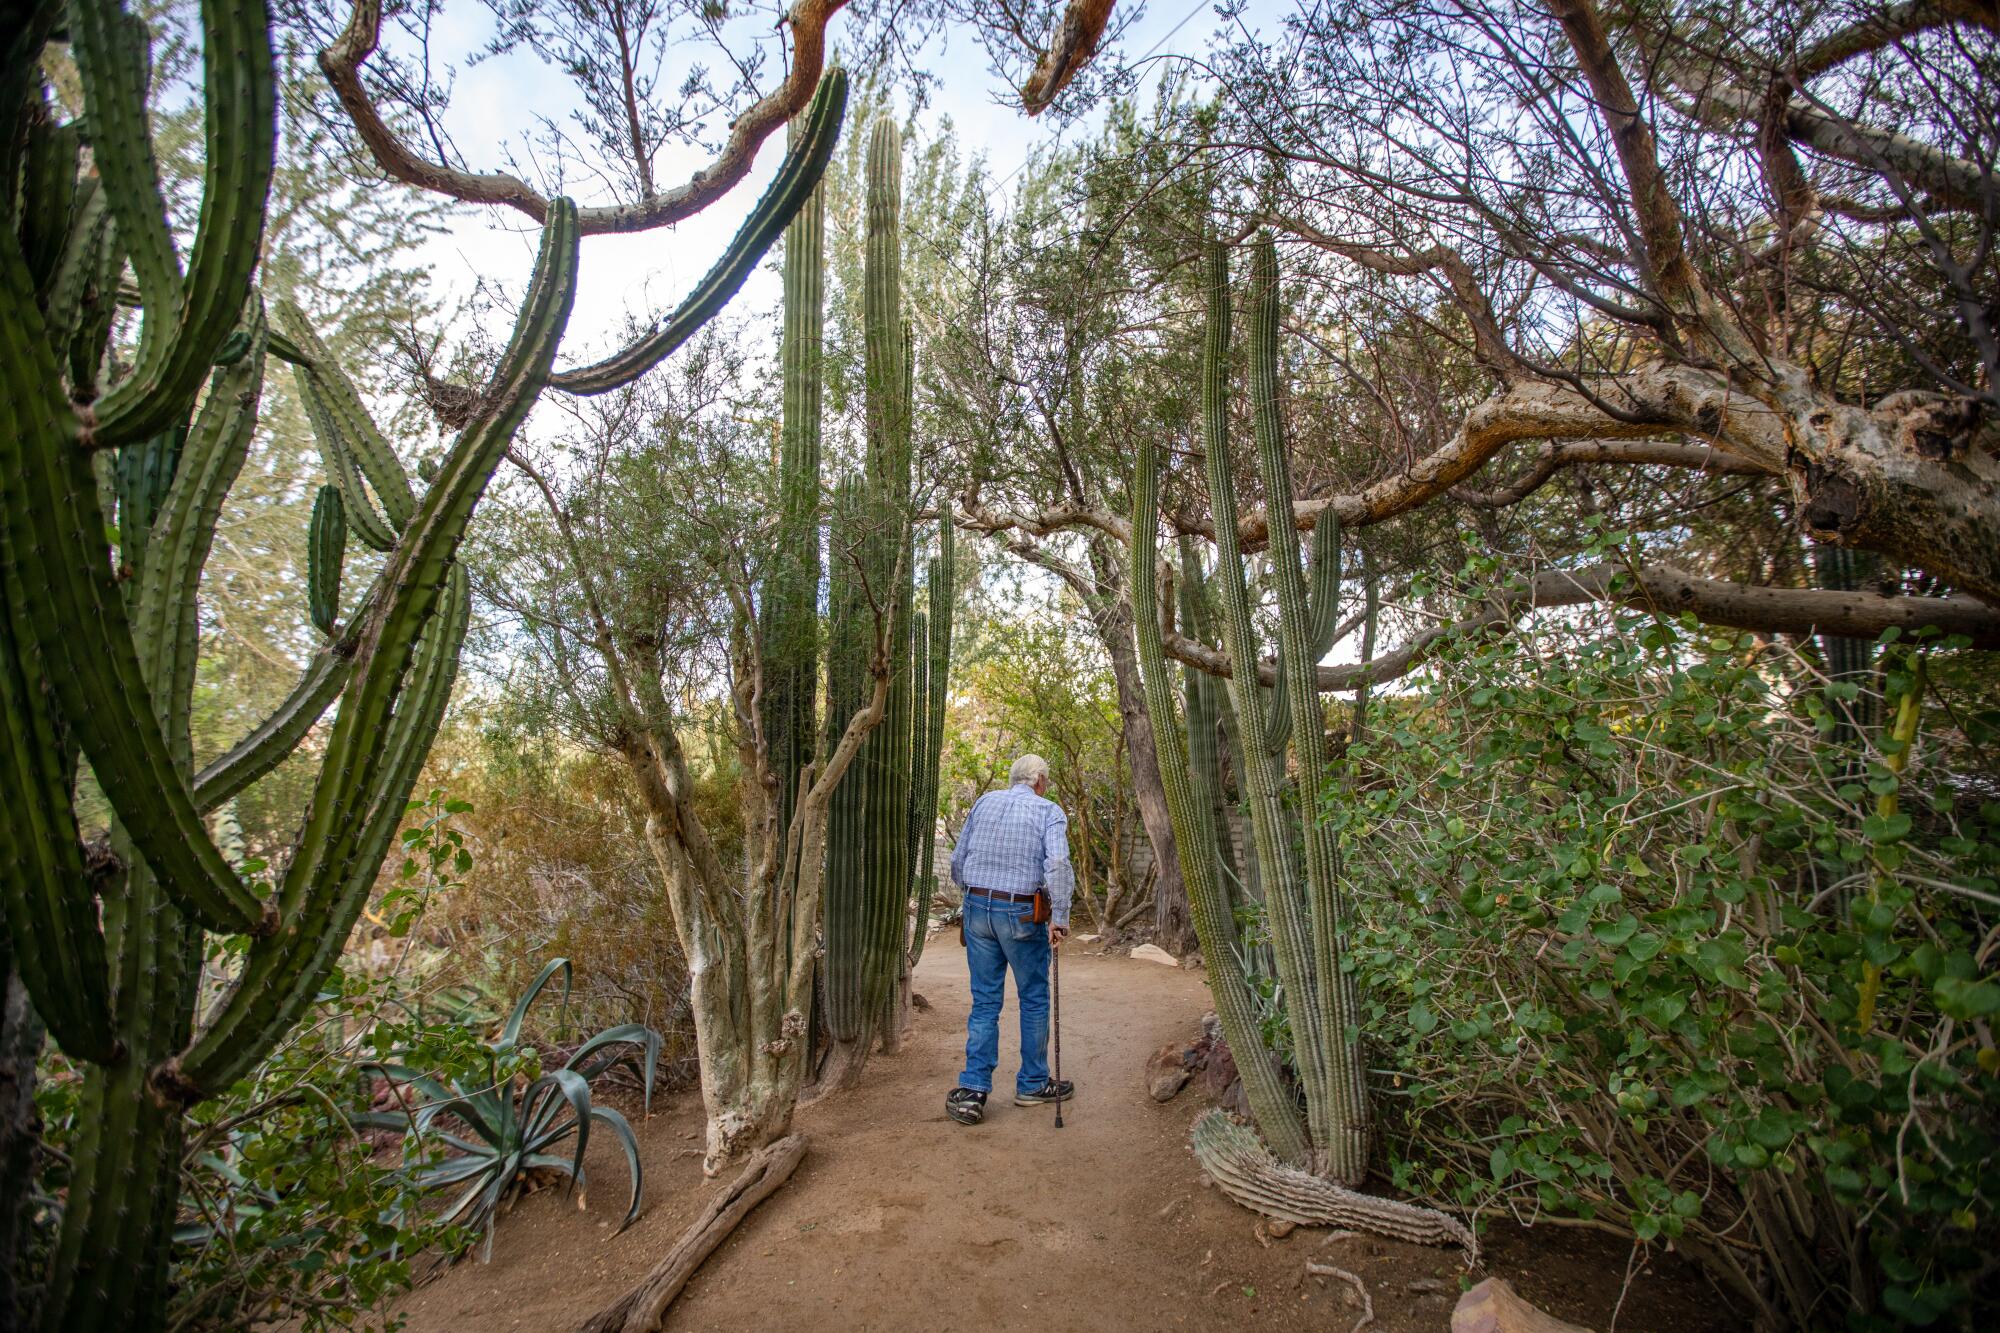 A man with a cane walking away from the camera on a path lined with cactuses.